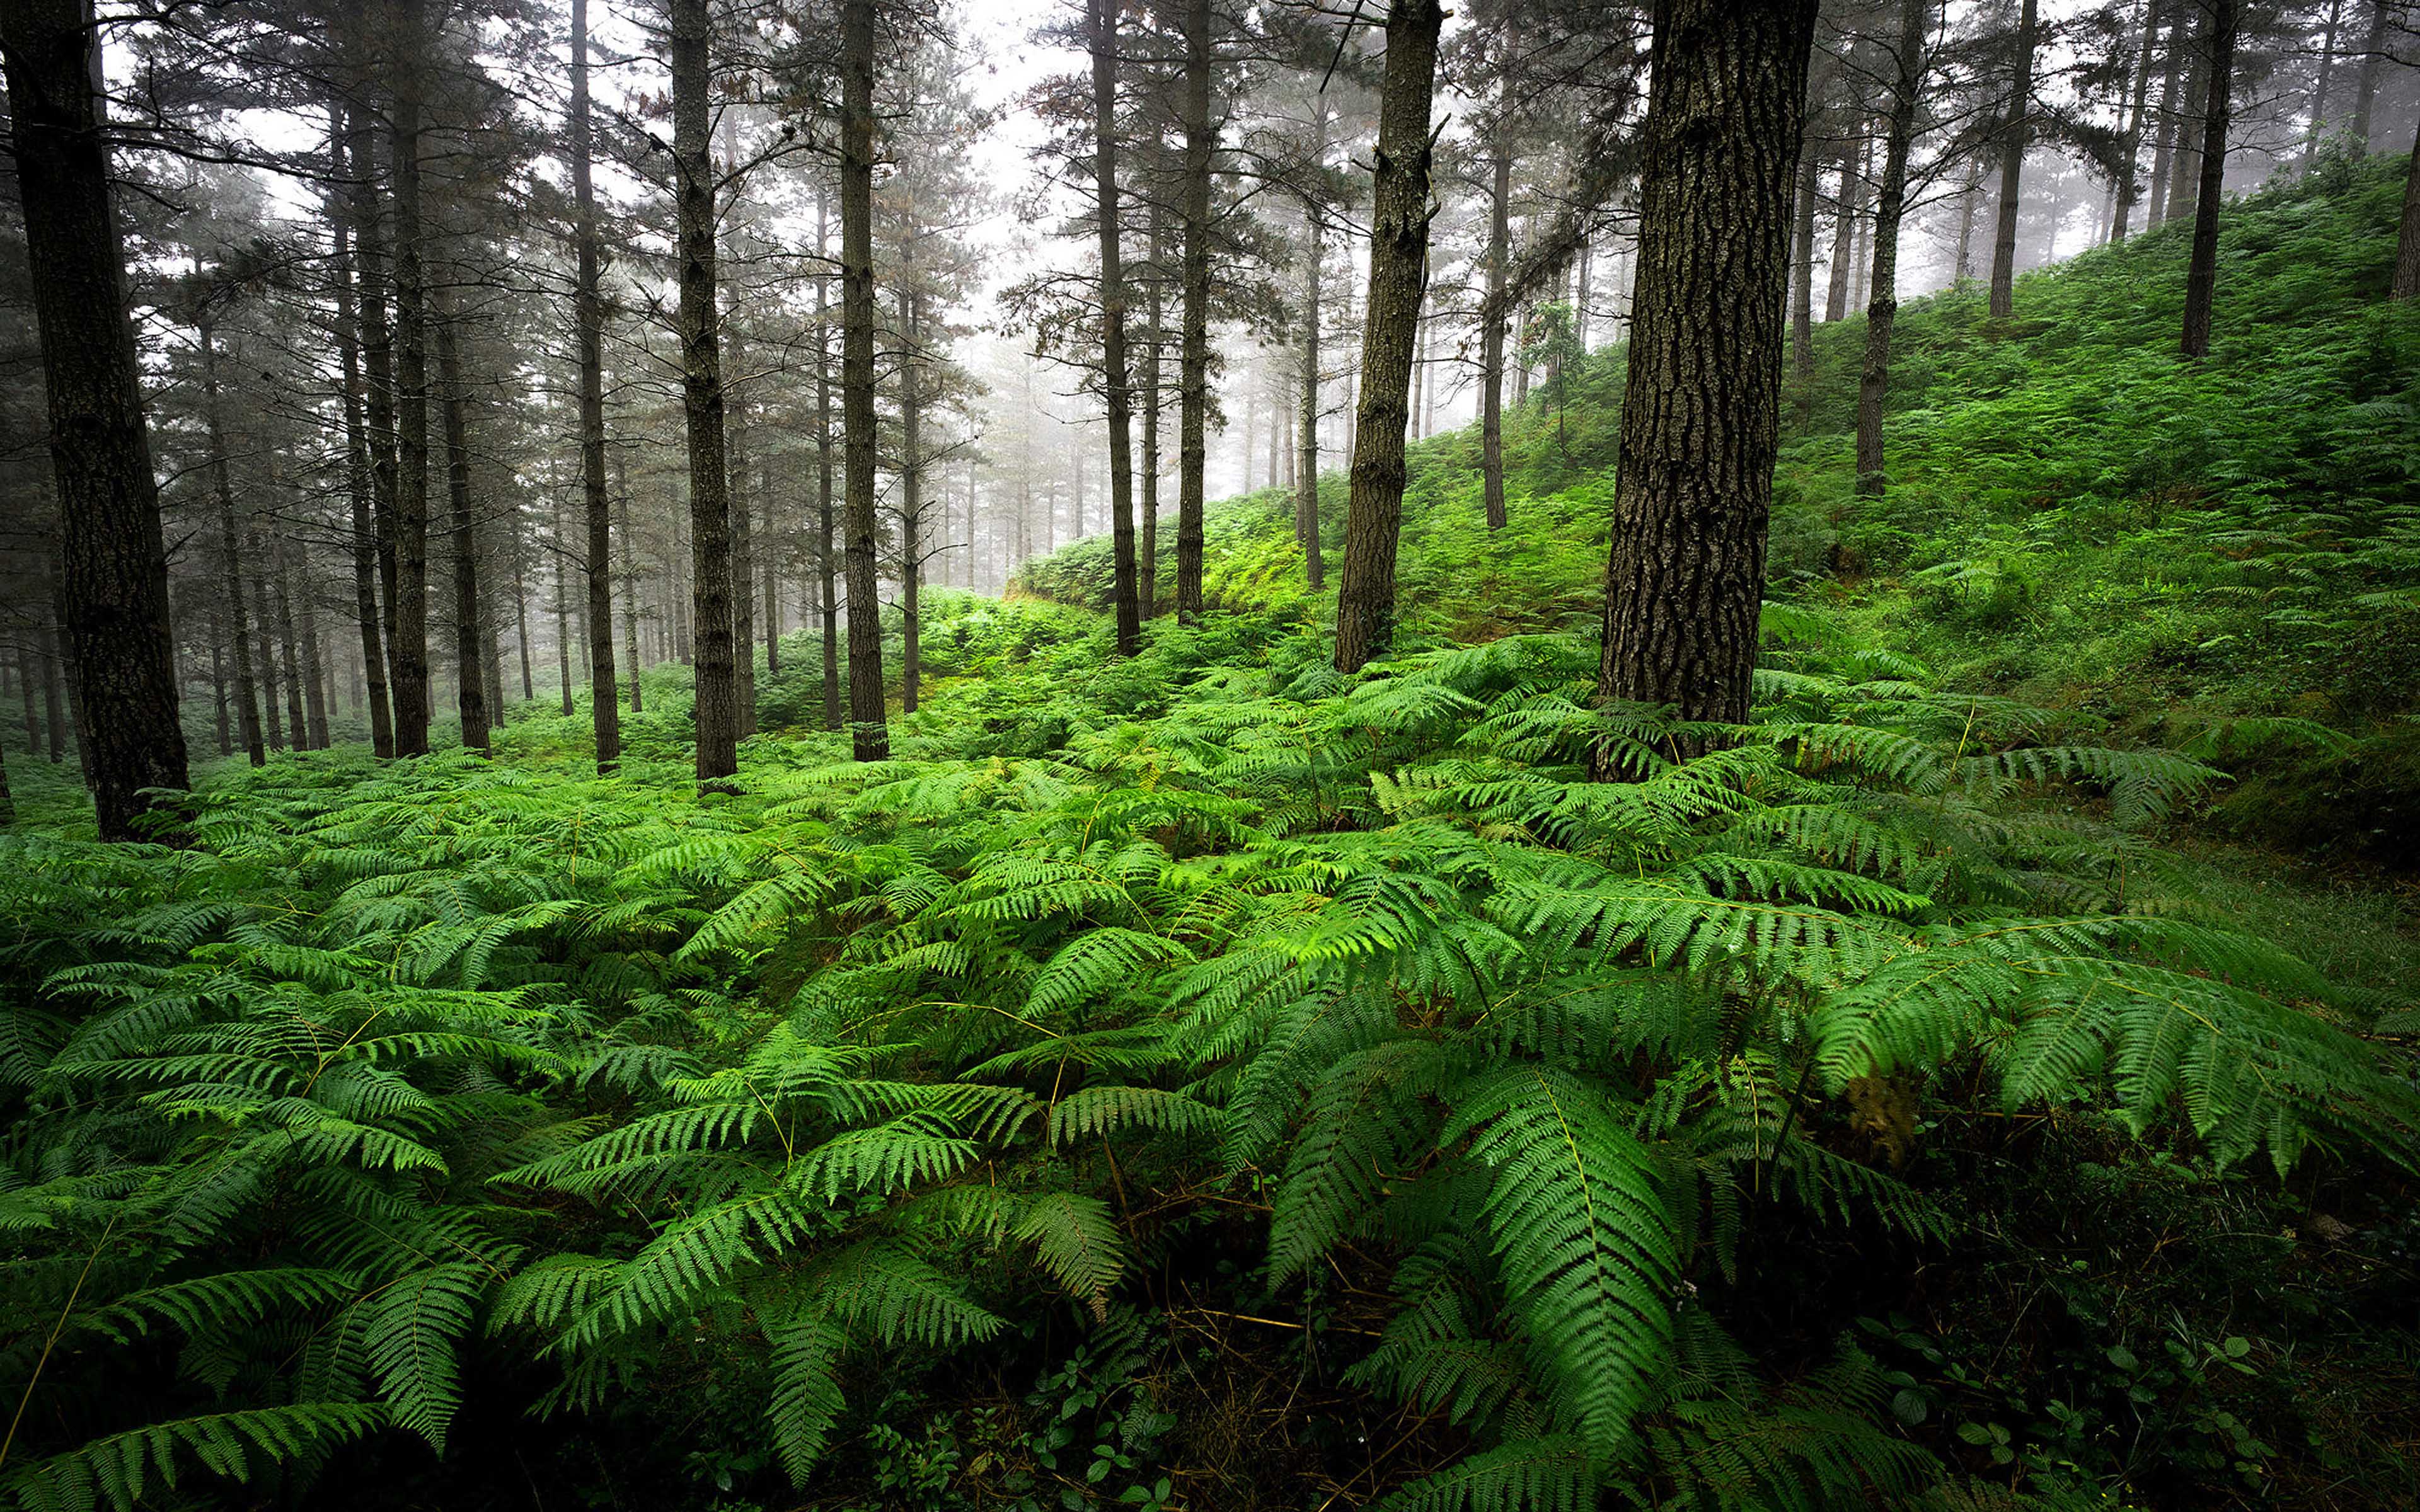 Landscape Forest Old Pine Trees Overgrown With Thick Green Fern